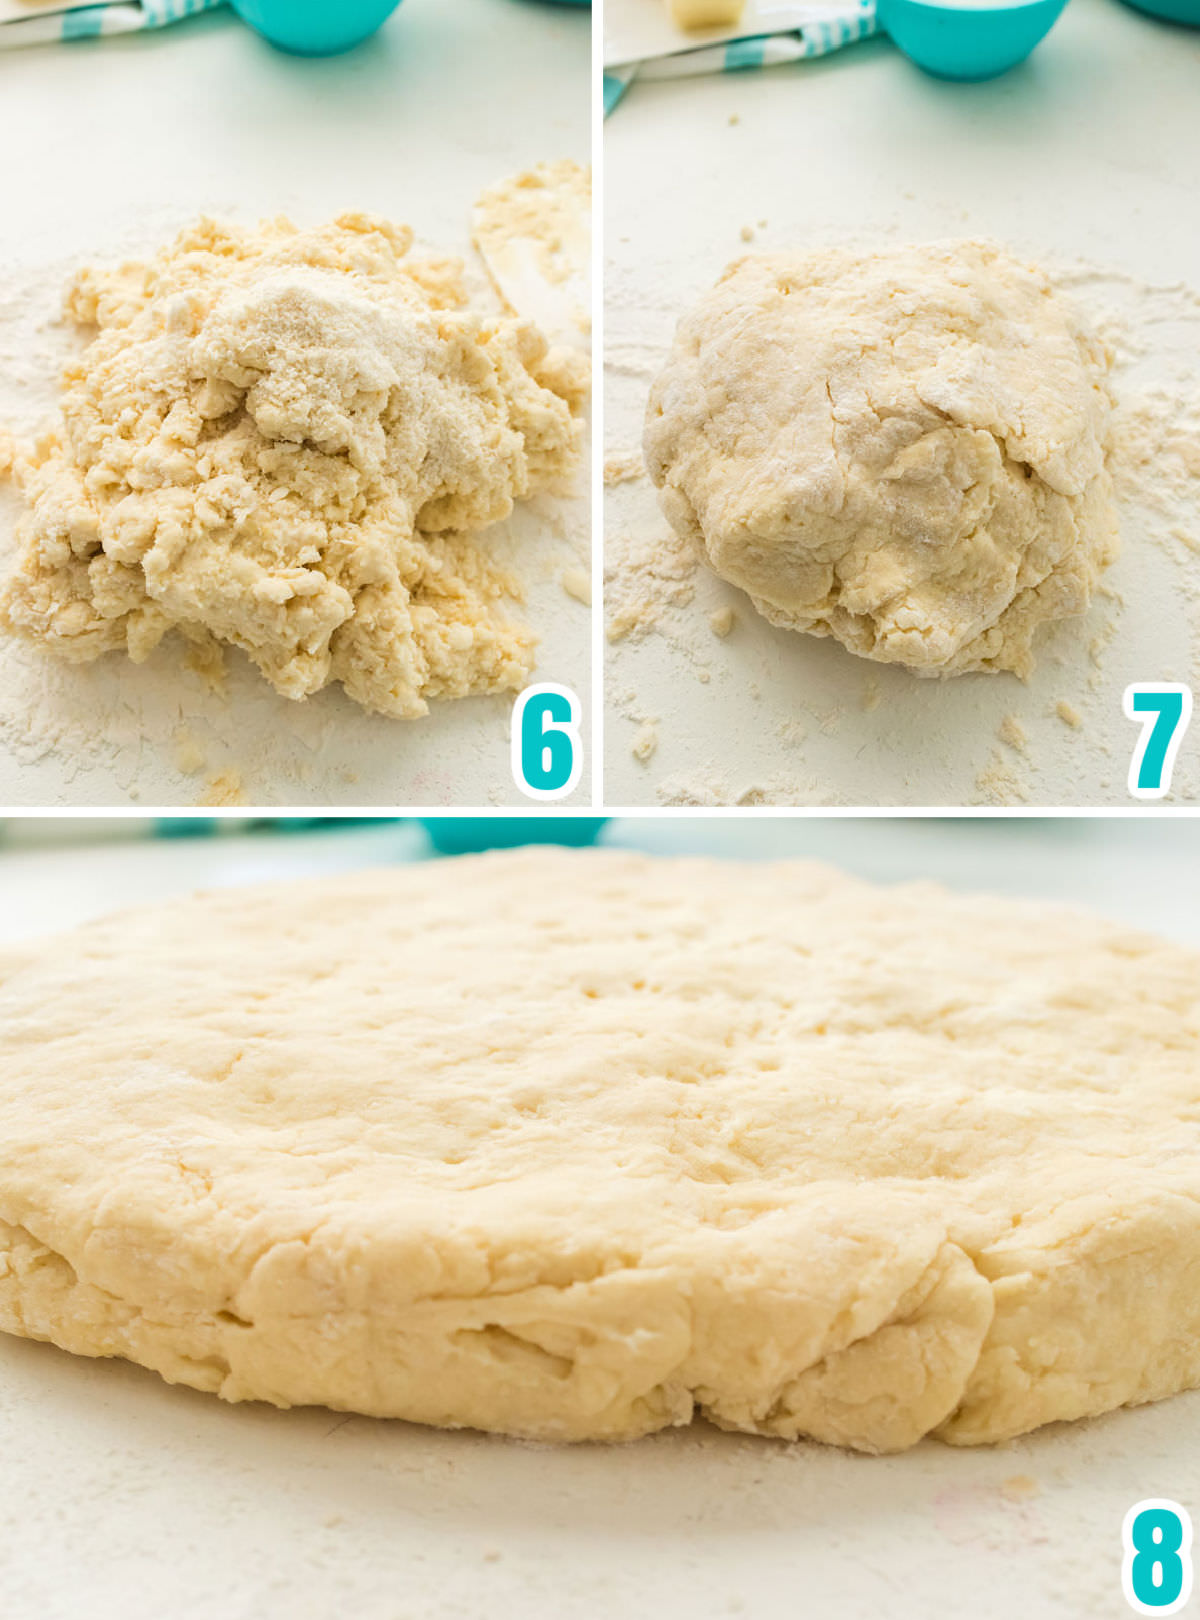 Collage image showing how to knead and then cut out the biscuits from the dough.